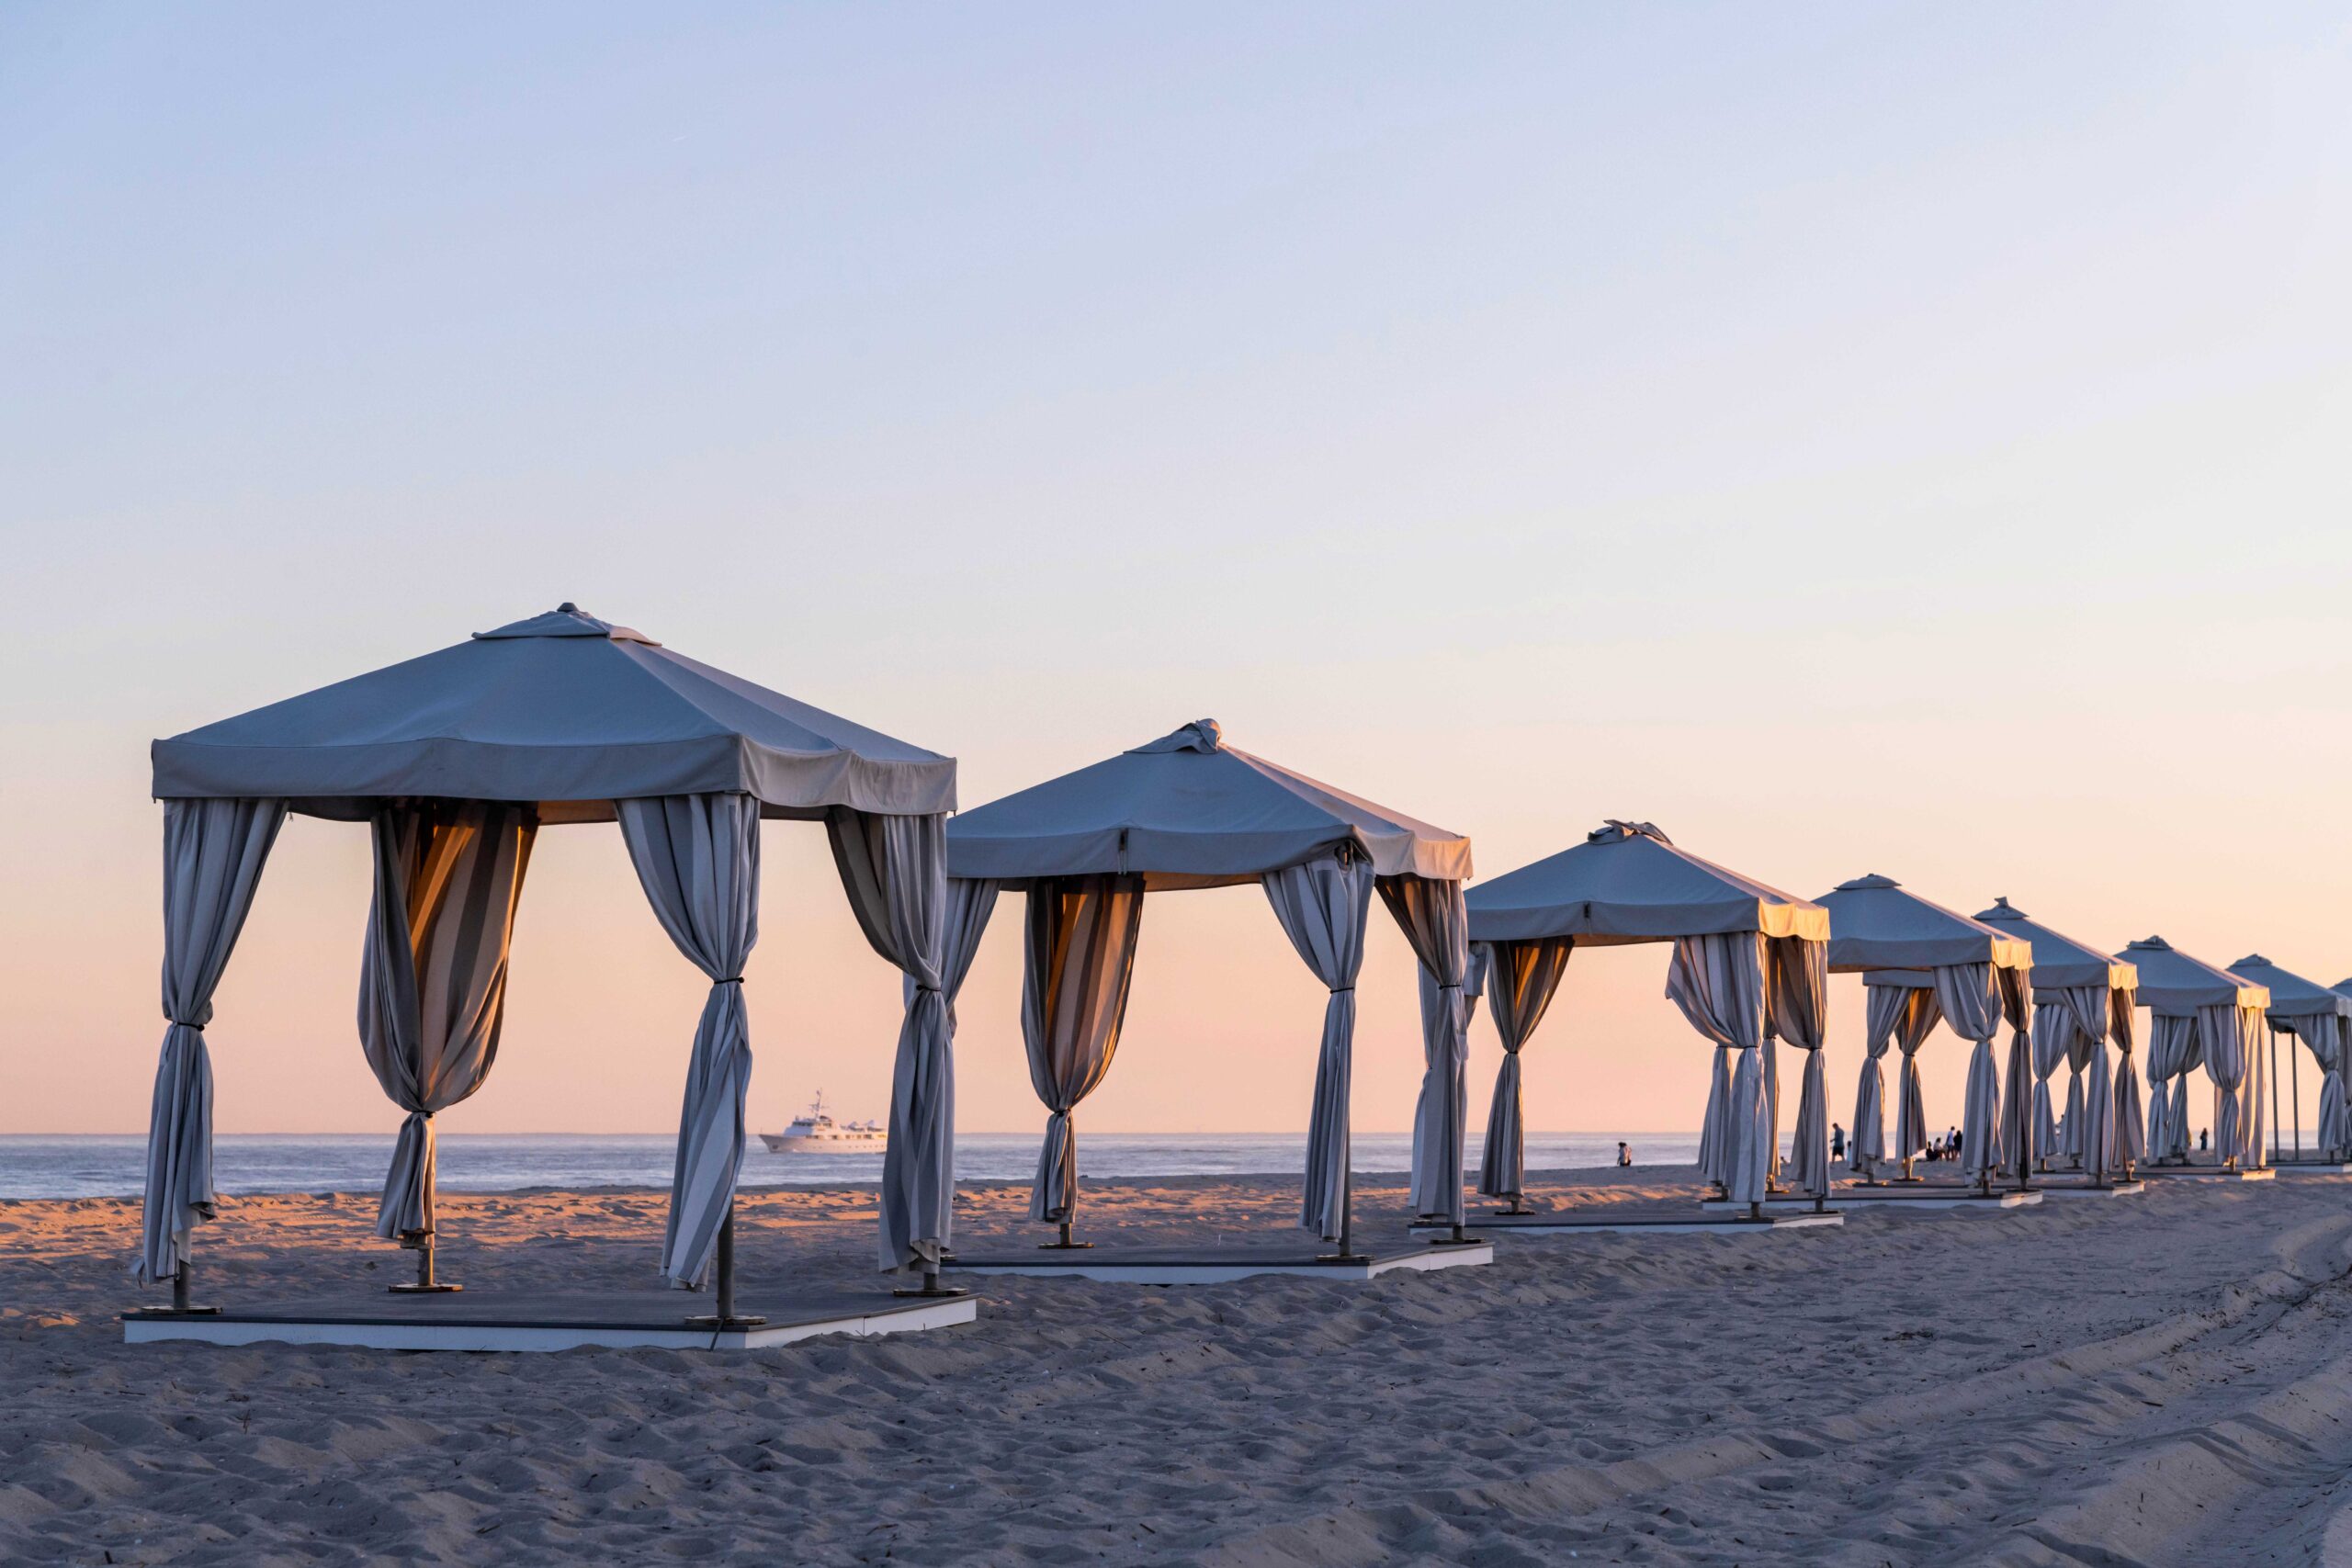 Beach cabanas lined up in a row at sunset